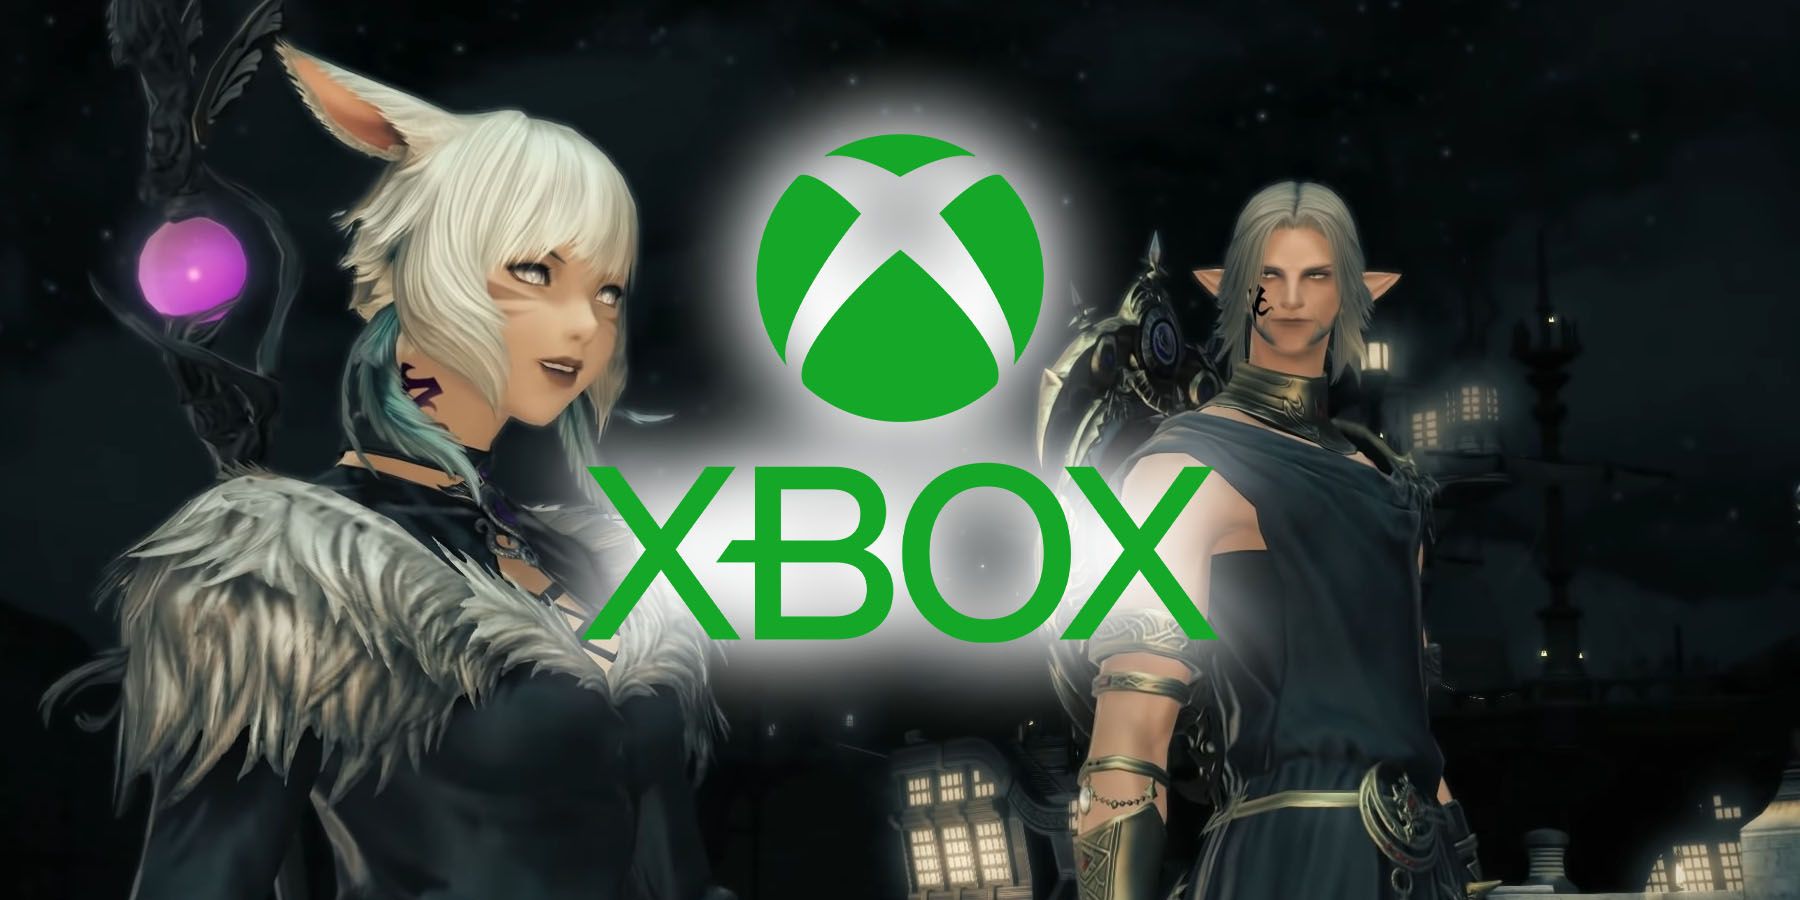 Final Fantasy 14 Announced for Xbox With 4K Support, Open Beta Confirmed -  IGN